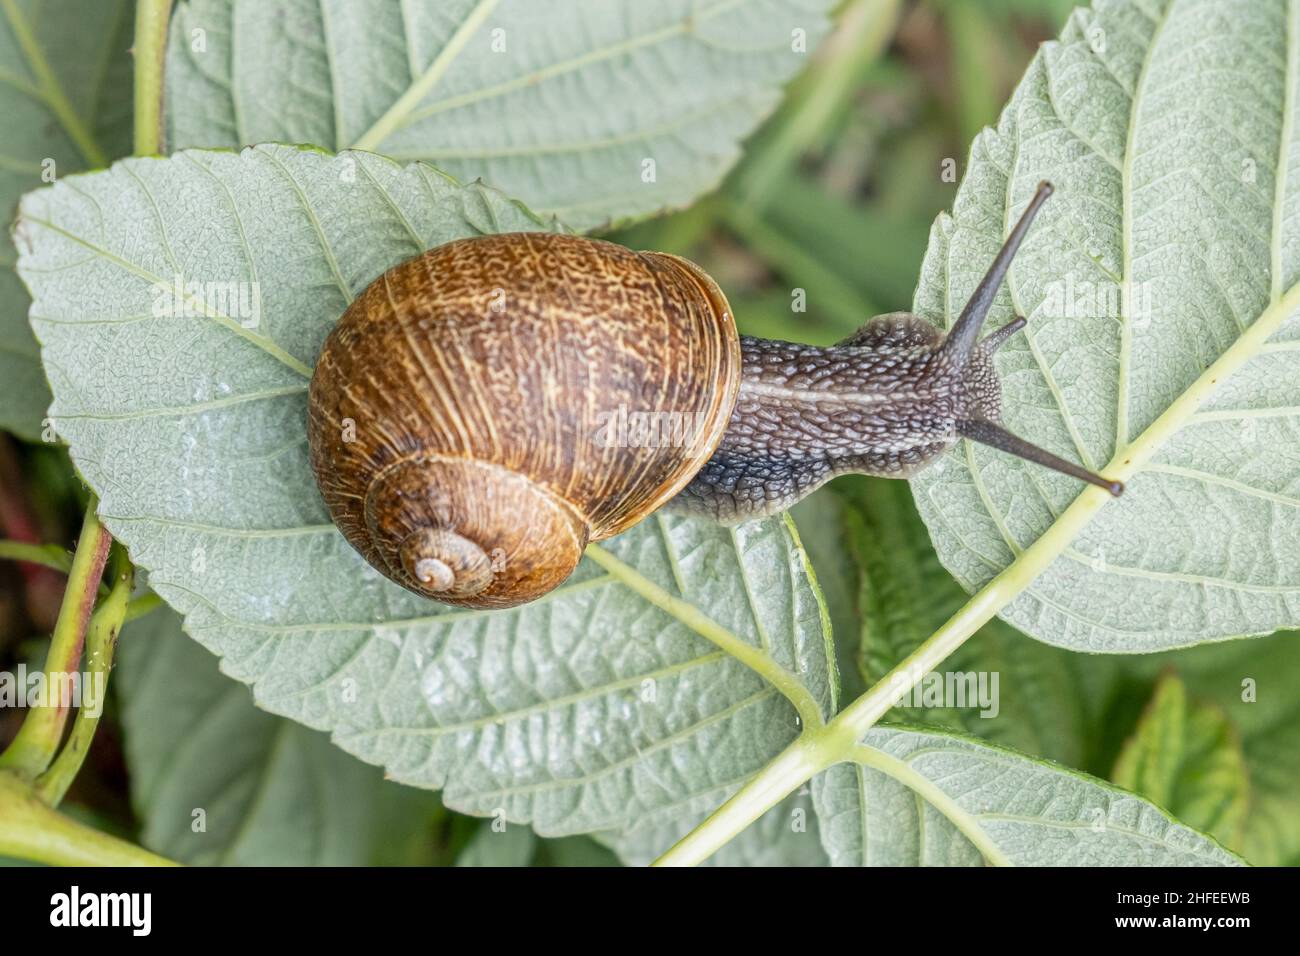 Burgundy snail or escargot crawling over green leaves. Snail with brown striped shell, crawling over vegetables. Caviar. Stock Photo